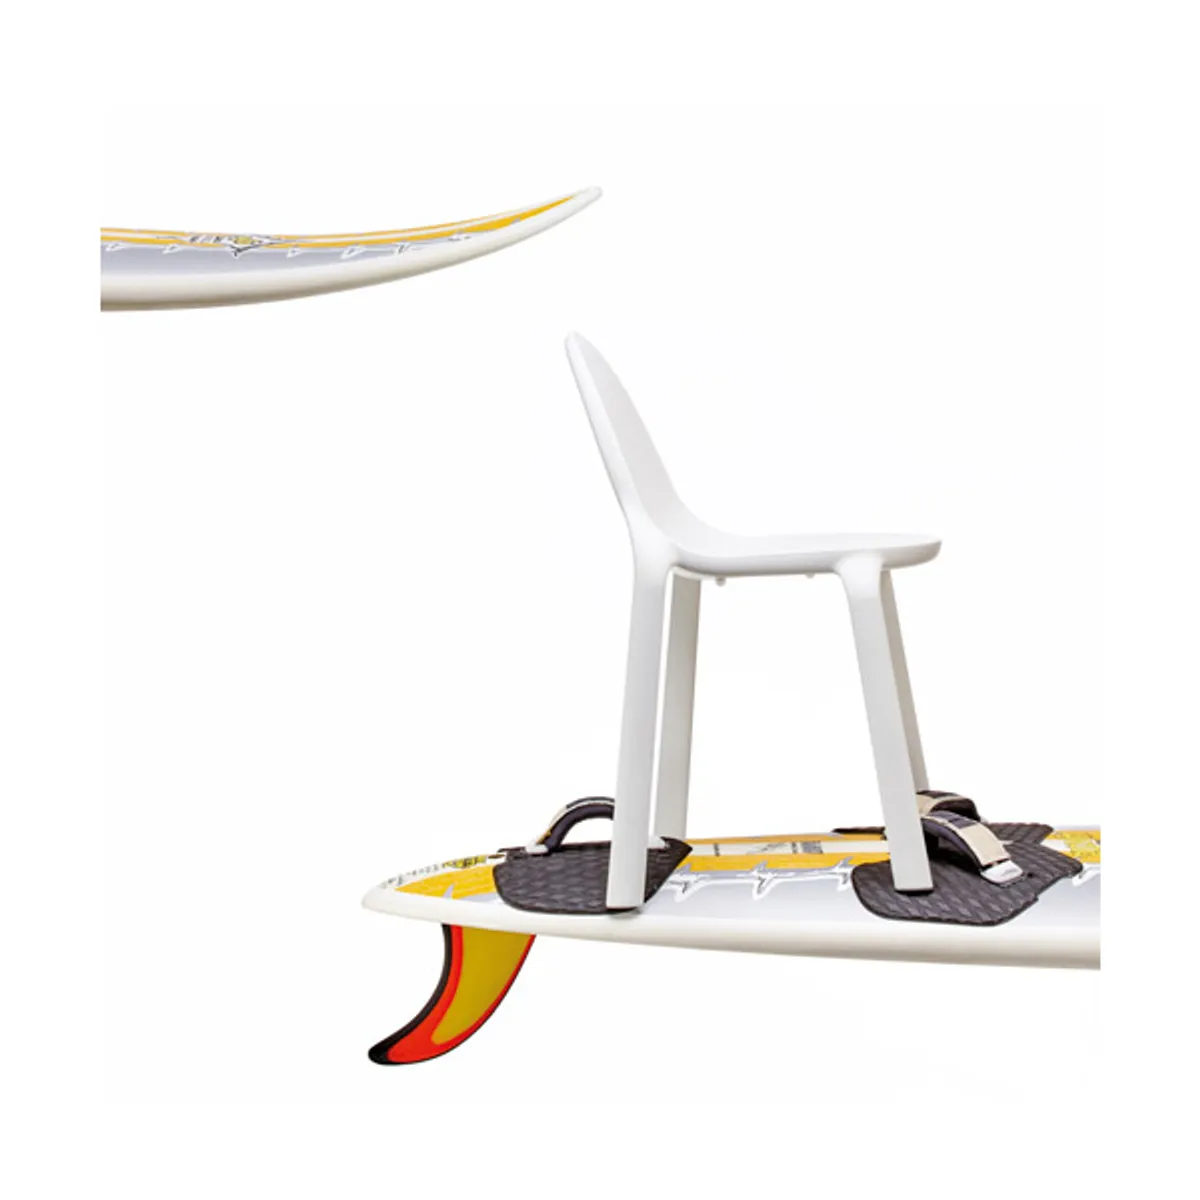 Droplet Chair Kids Chair Surfboard Situ Inside Out Contracts